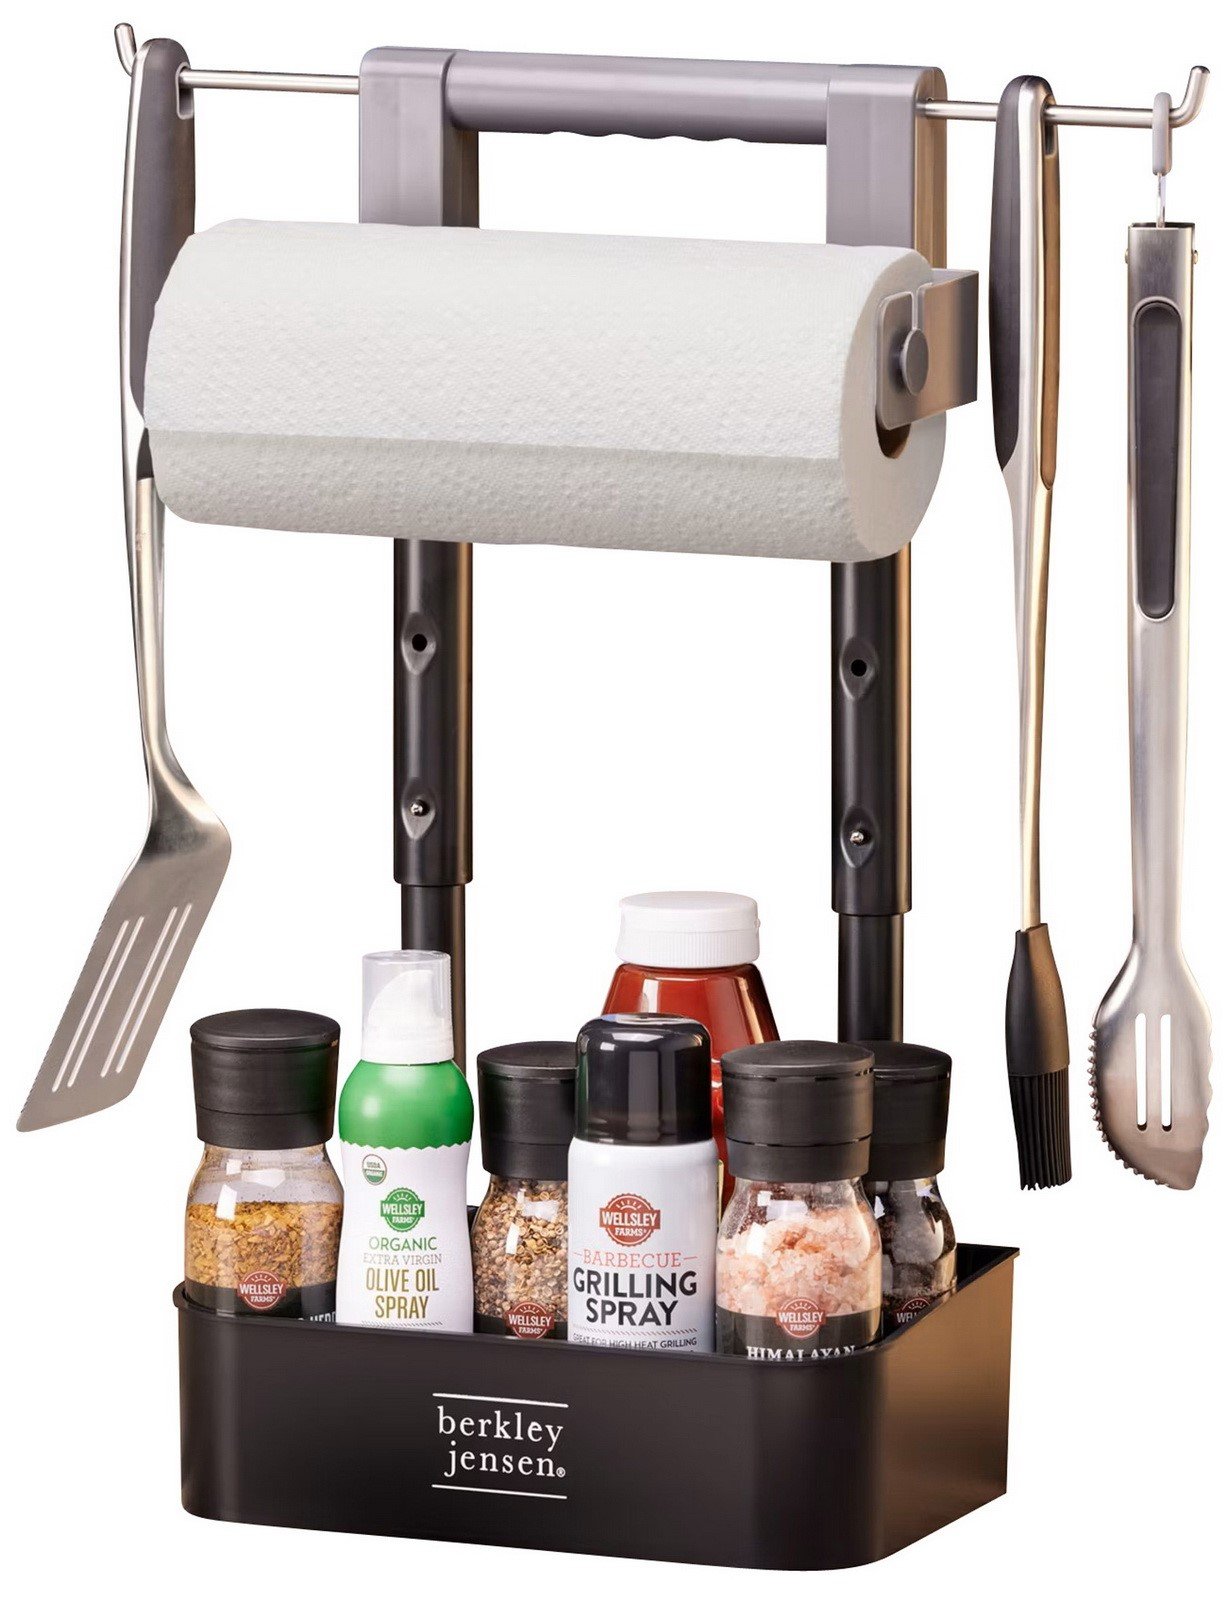 BBQ Barbecue Serving Caddy Condiment Paper Towel Roll & Utensils Holder